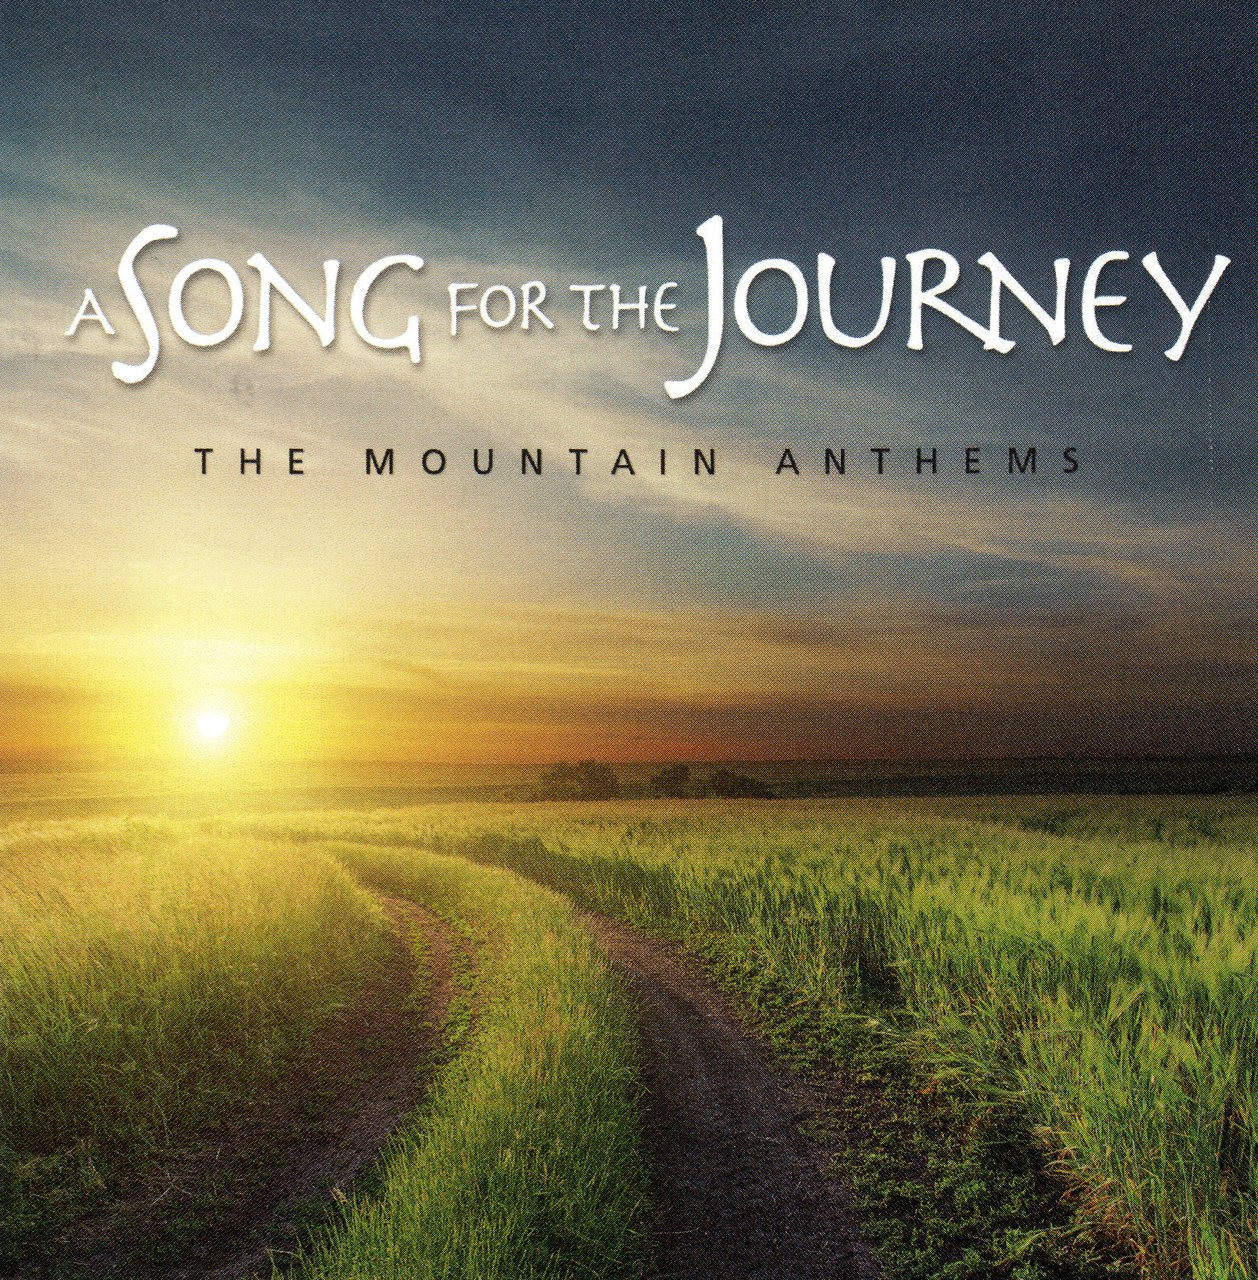 the journey the song